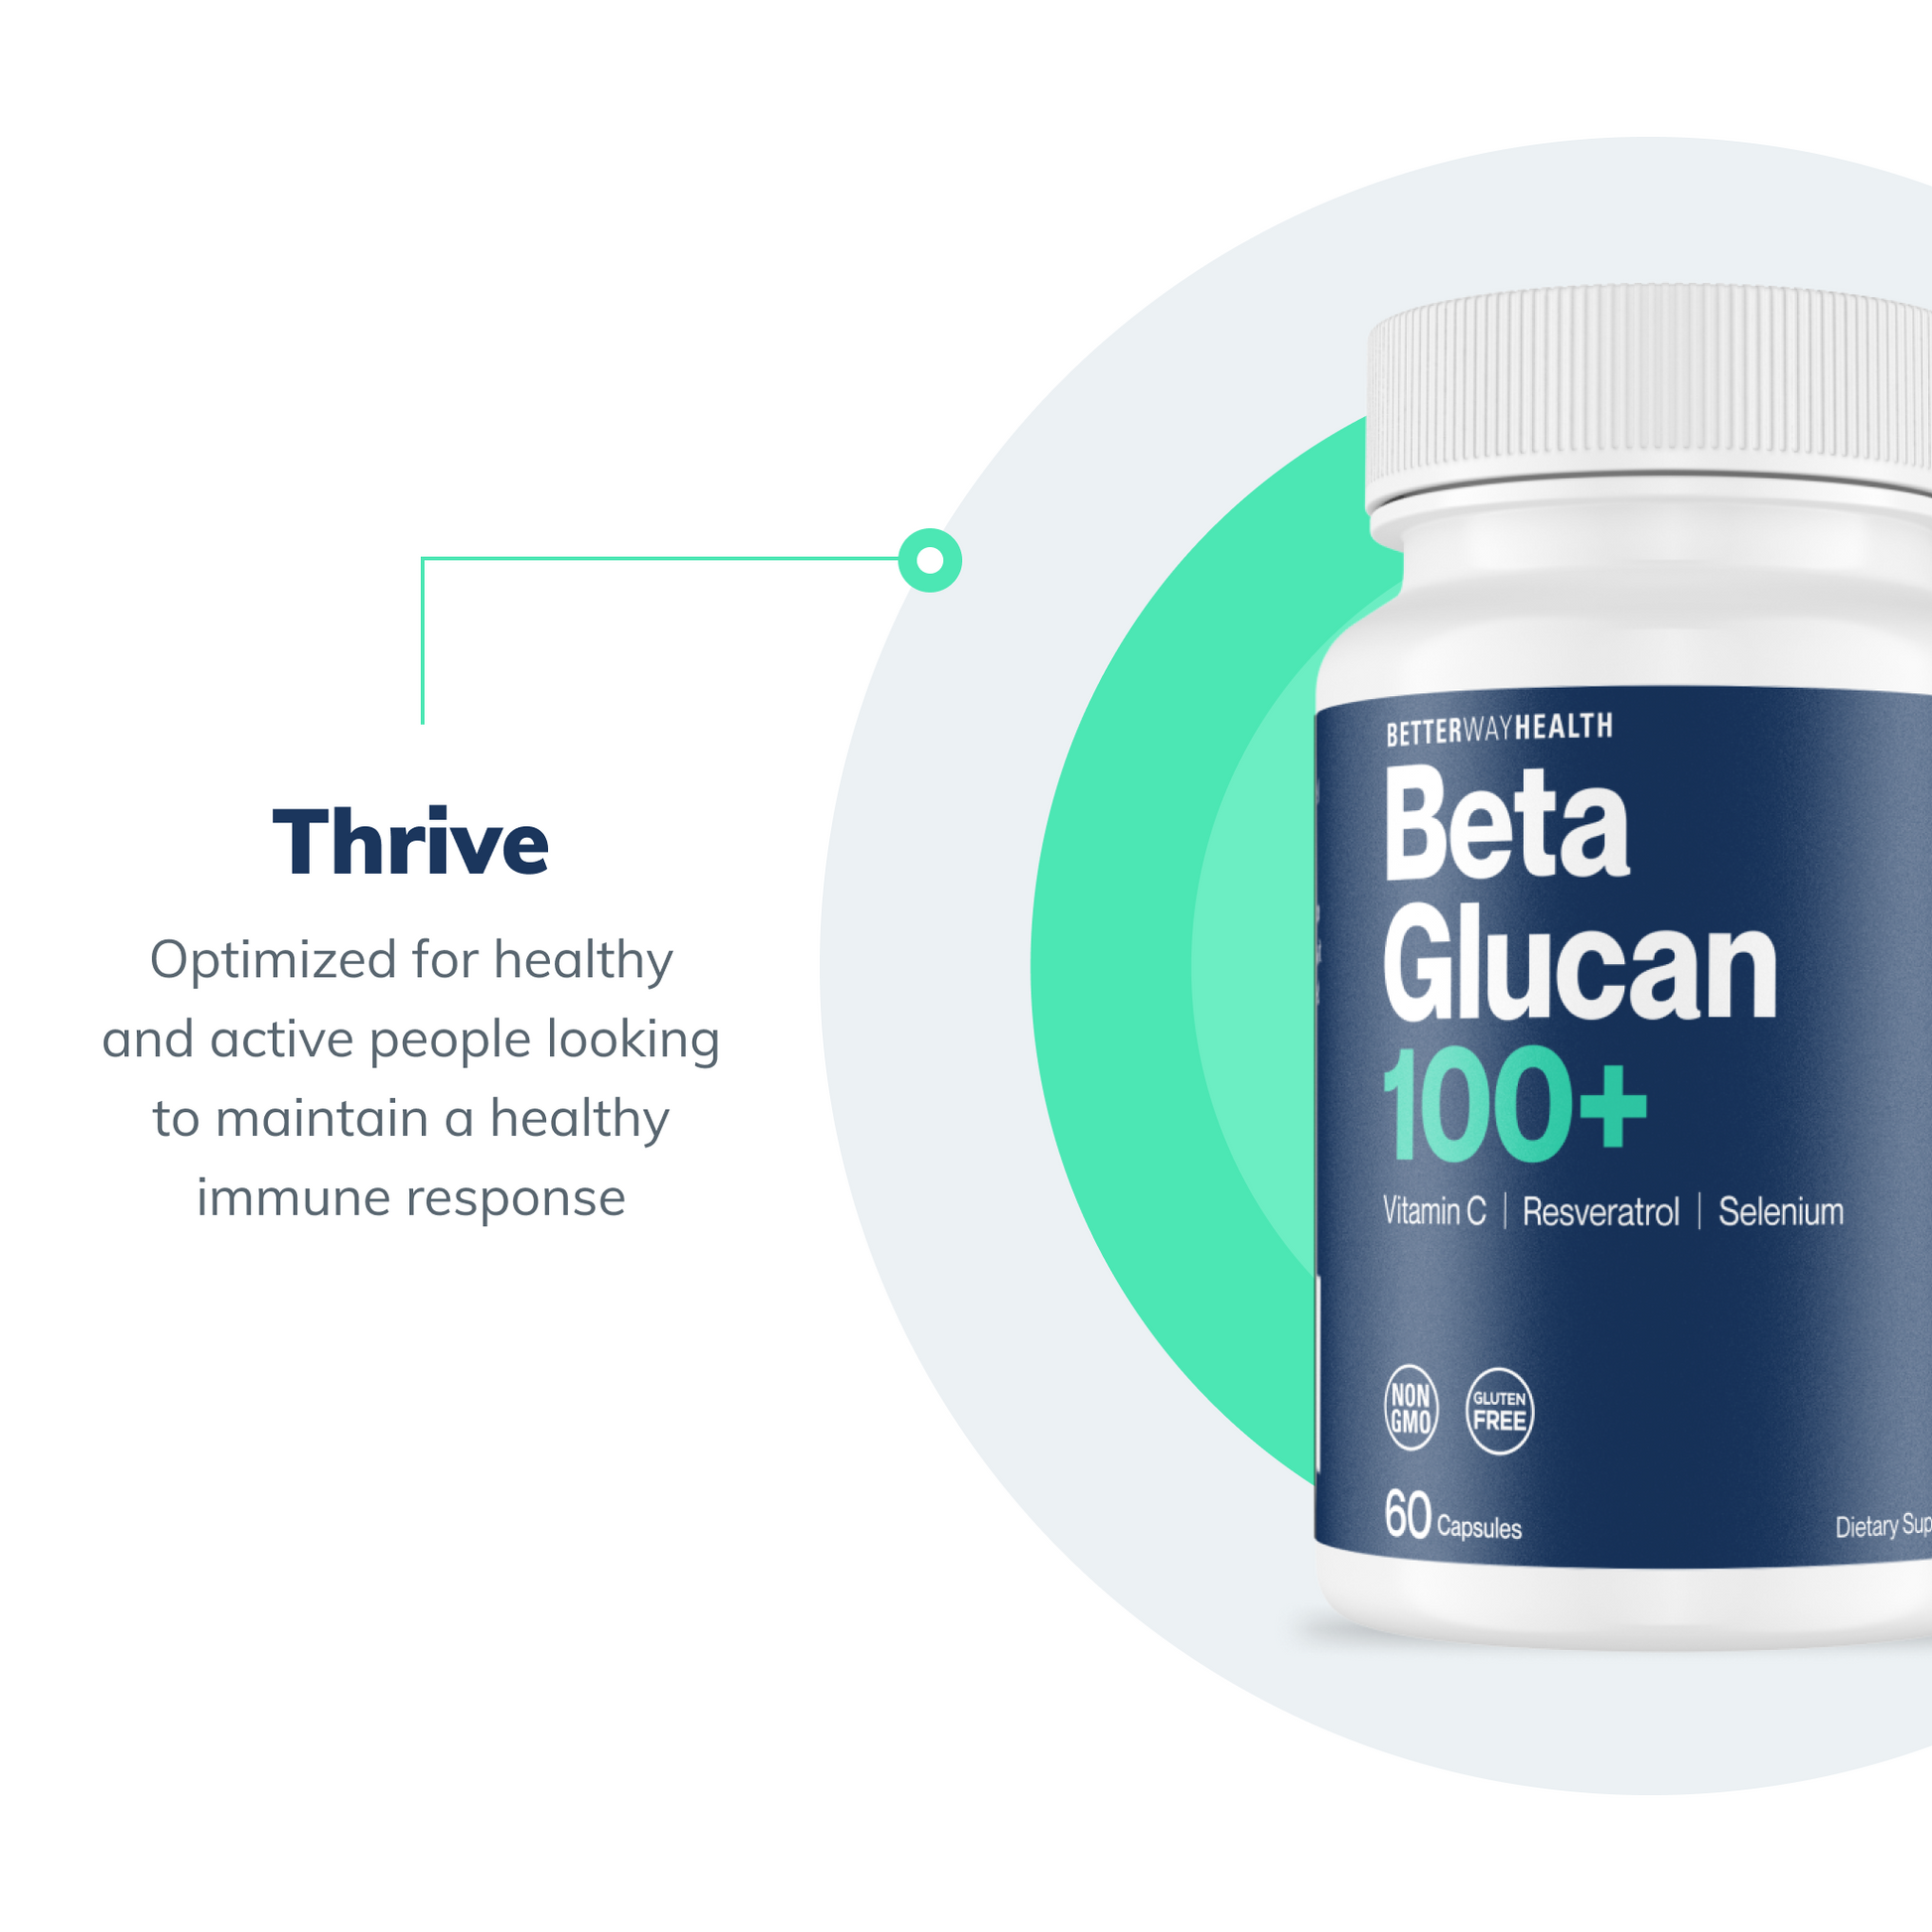 optimized for healthy people living active lives for enhanced immunity.